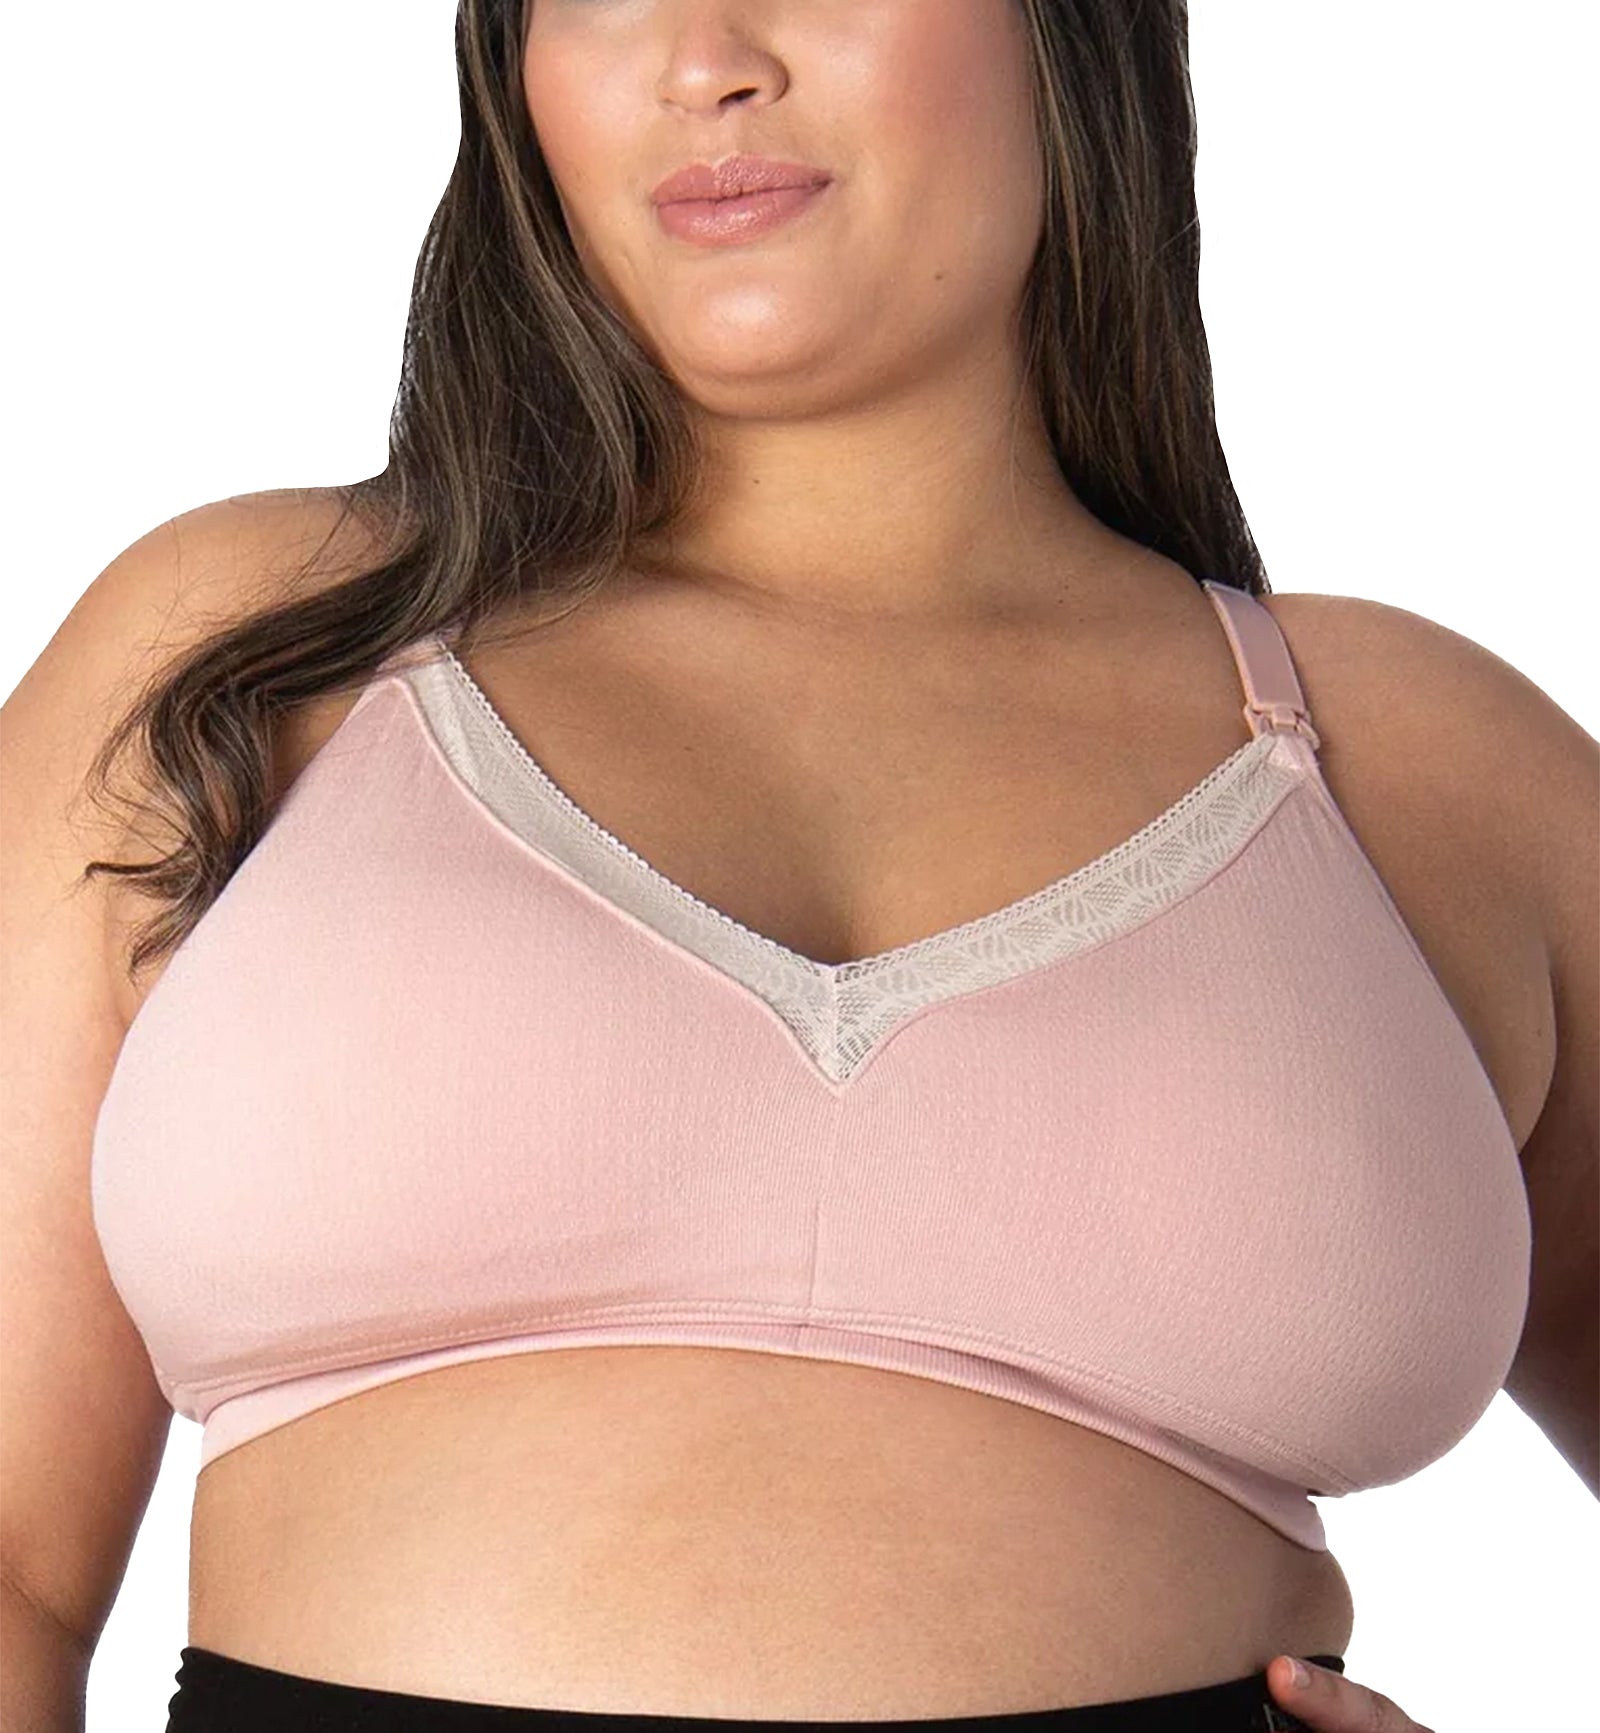 HOTmilk Caress Plunge Nursing Bra (CPLP),Small A-D,Lotus Pink - Lotus Pink,Small A-D Cups